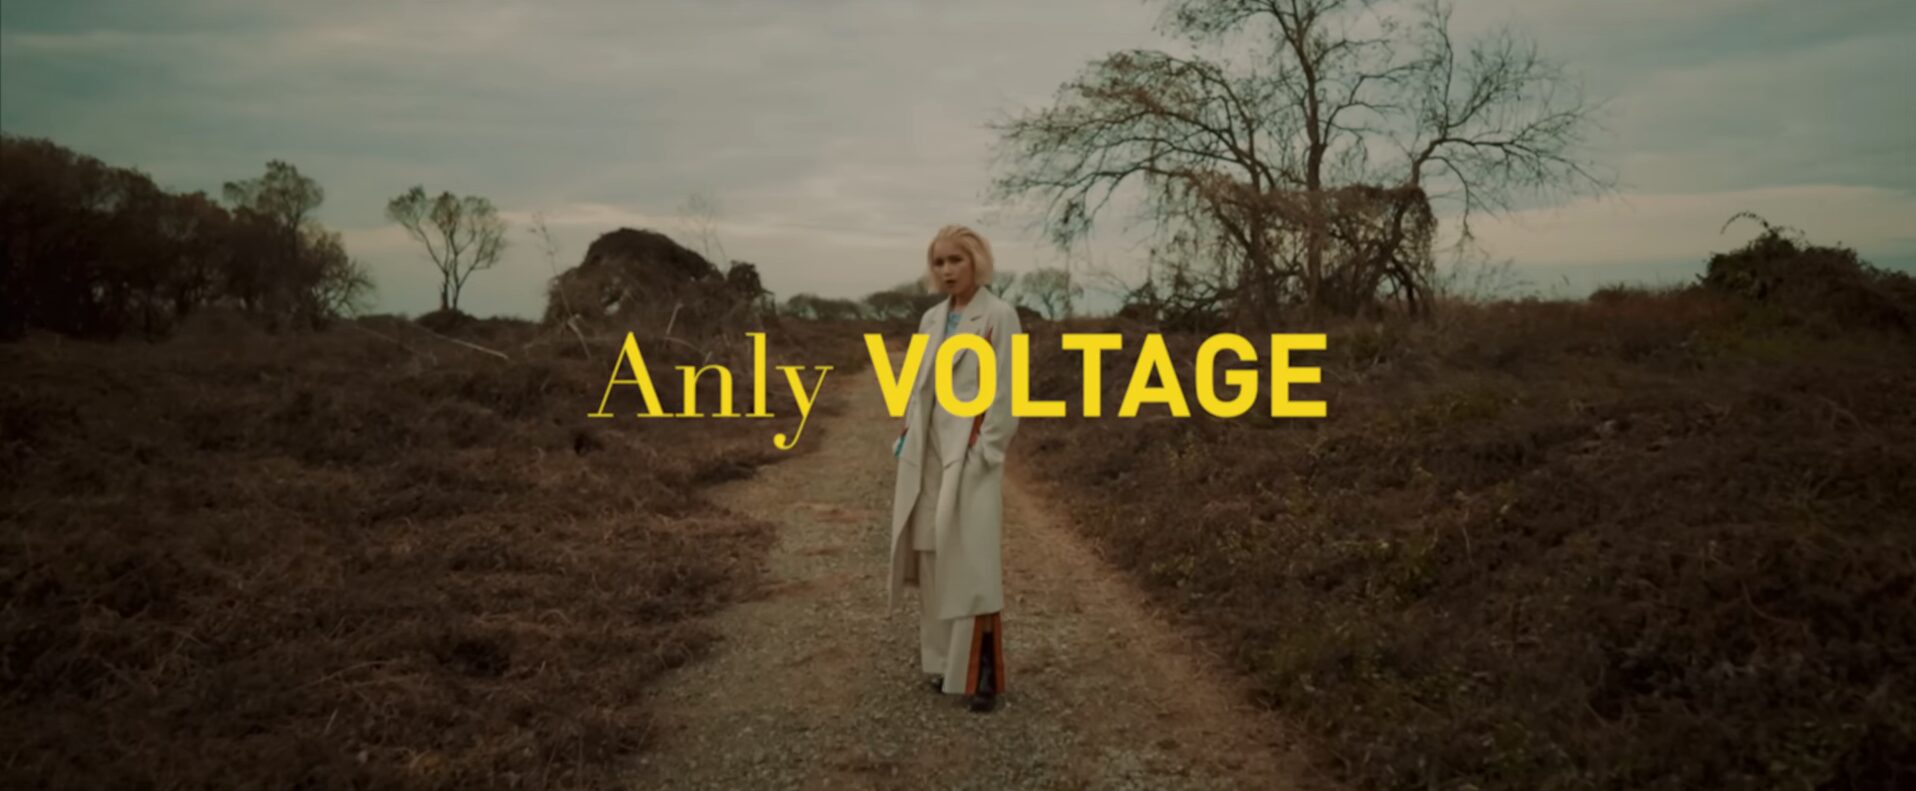 Japanese Sign Language Makes Appearance in ANLY’s Newest Single